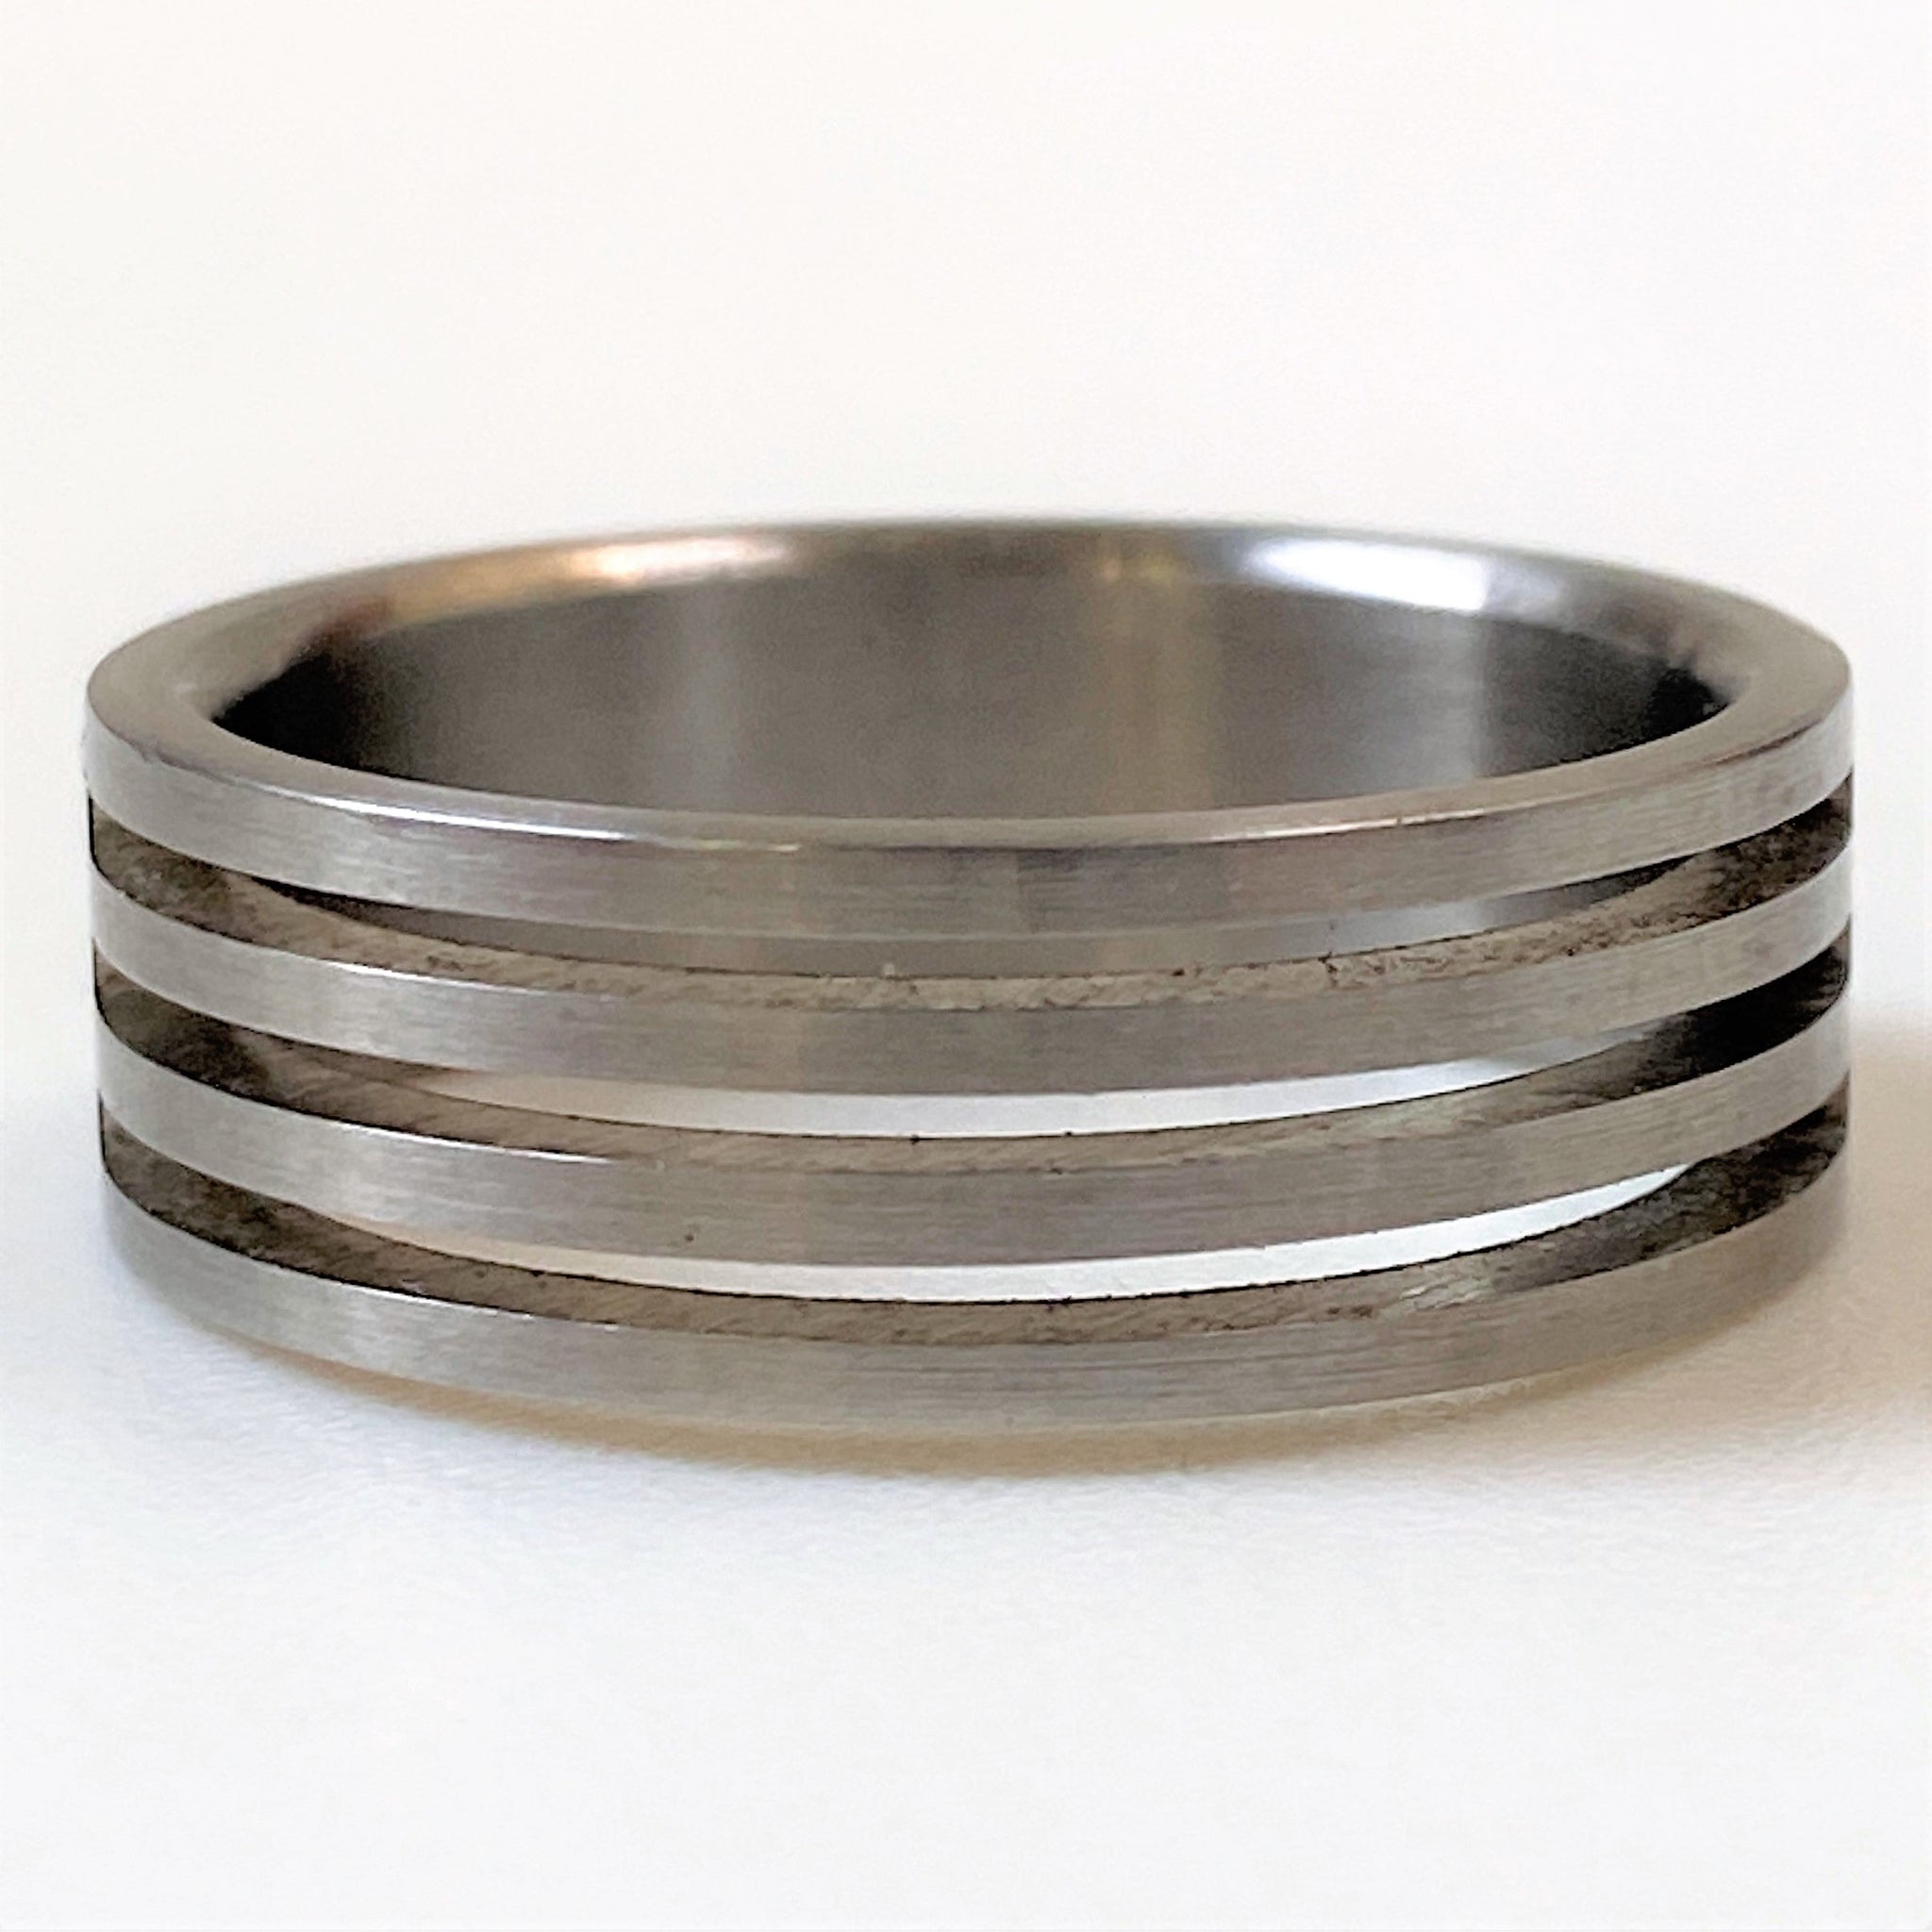 Stainless Steel Men’s Ring with Slots